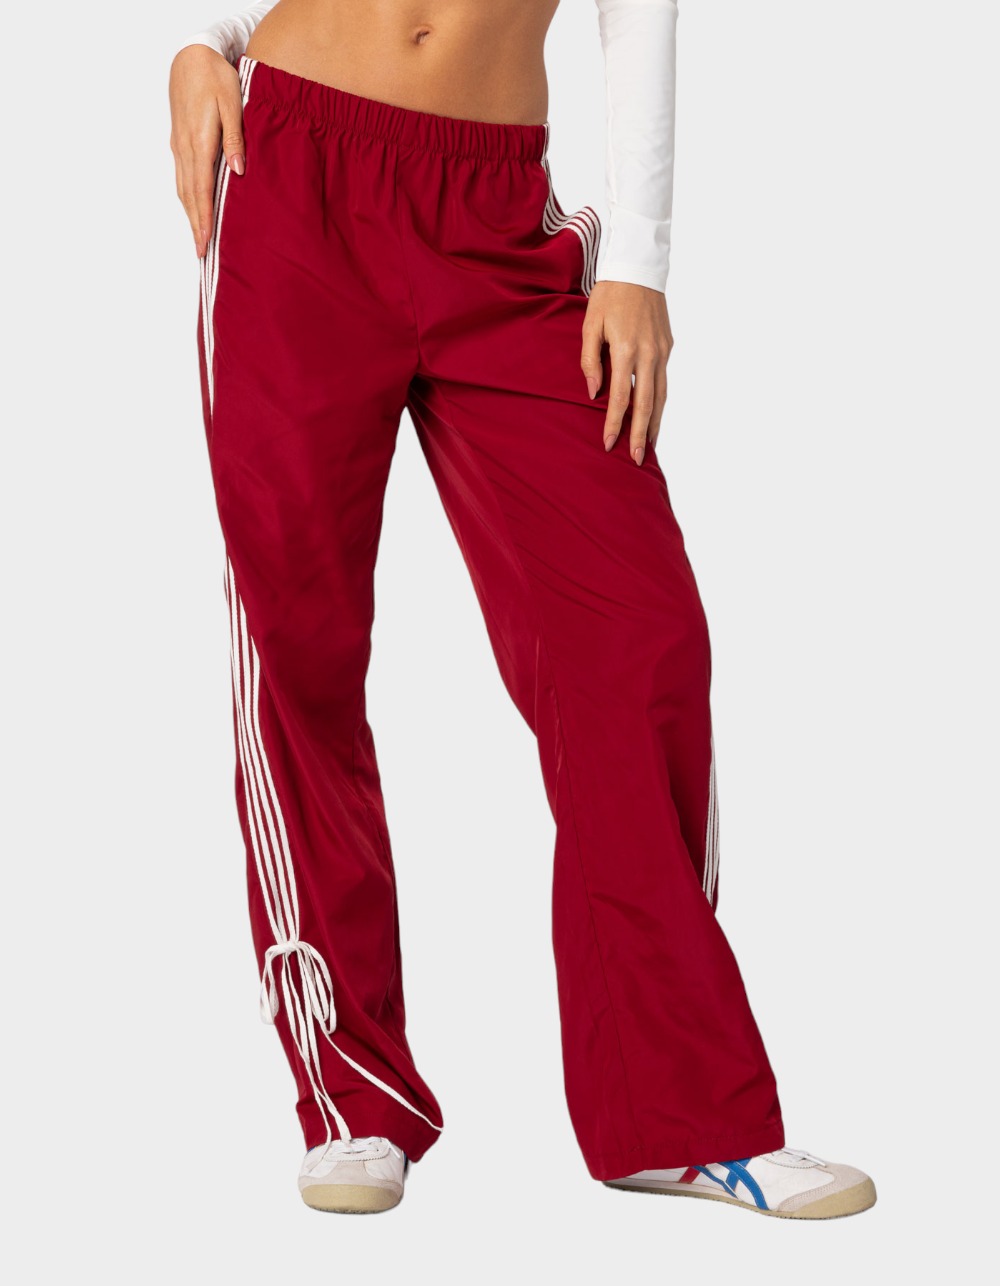 EDIKTED Remy Ribbon Womens Track Pants - RED | Tillys